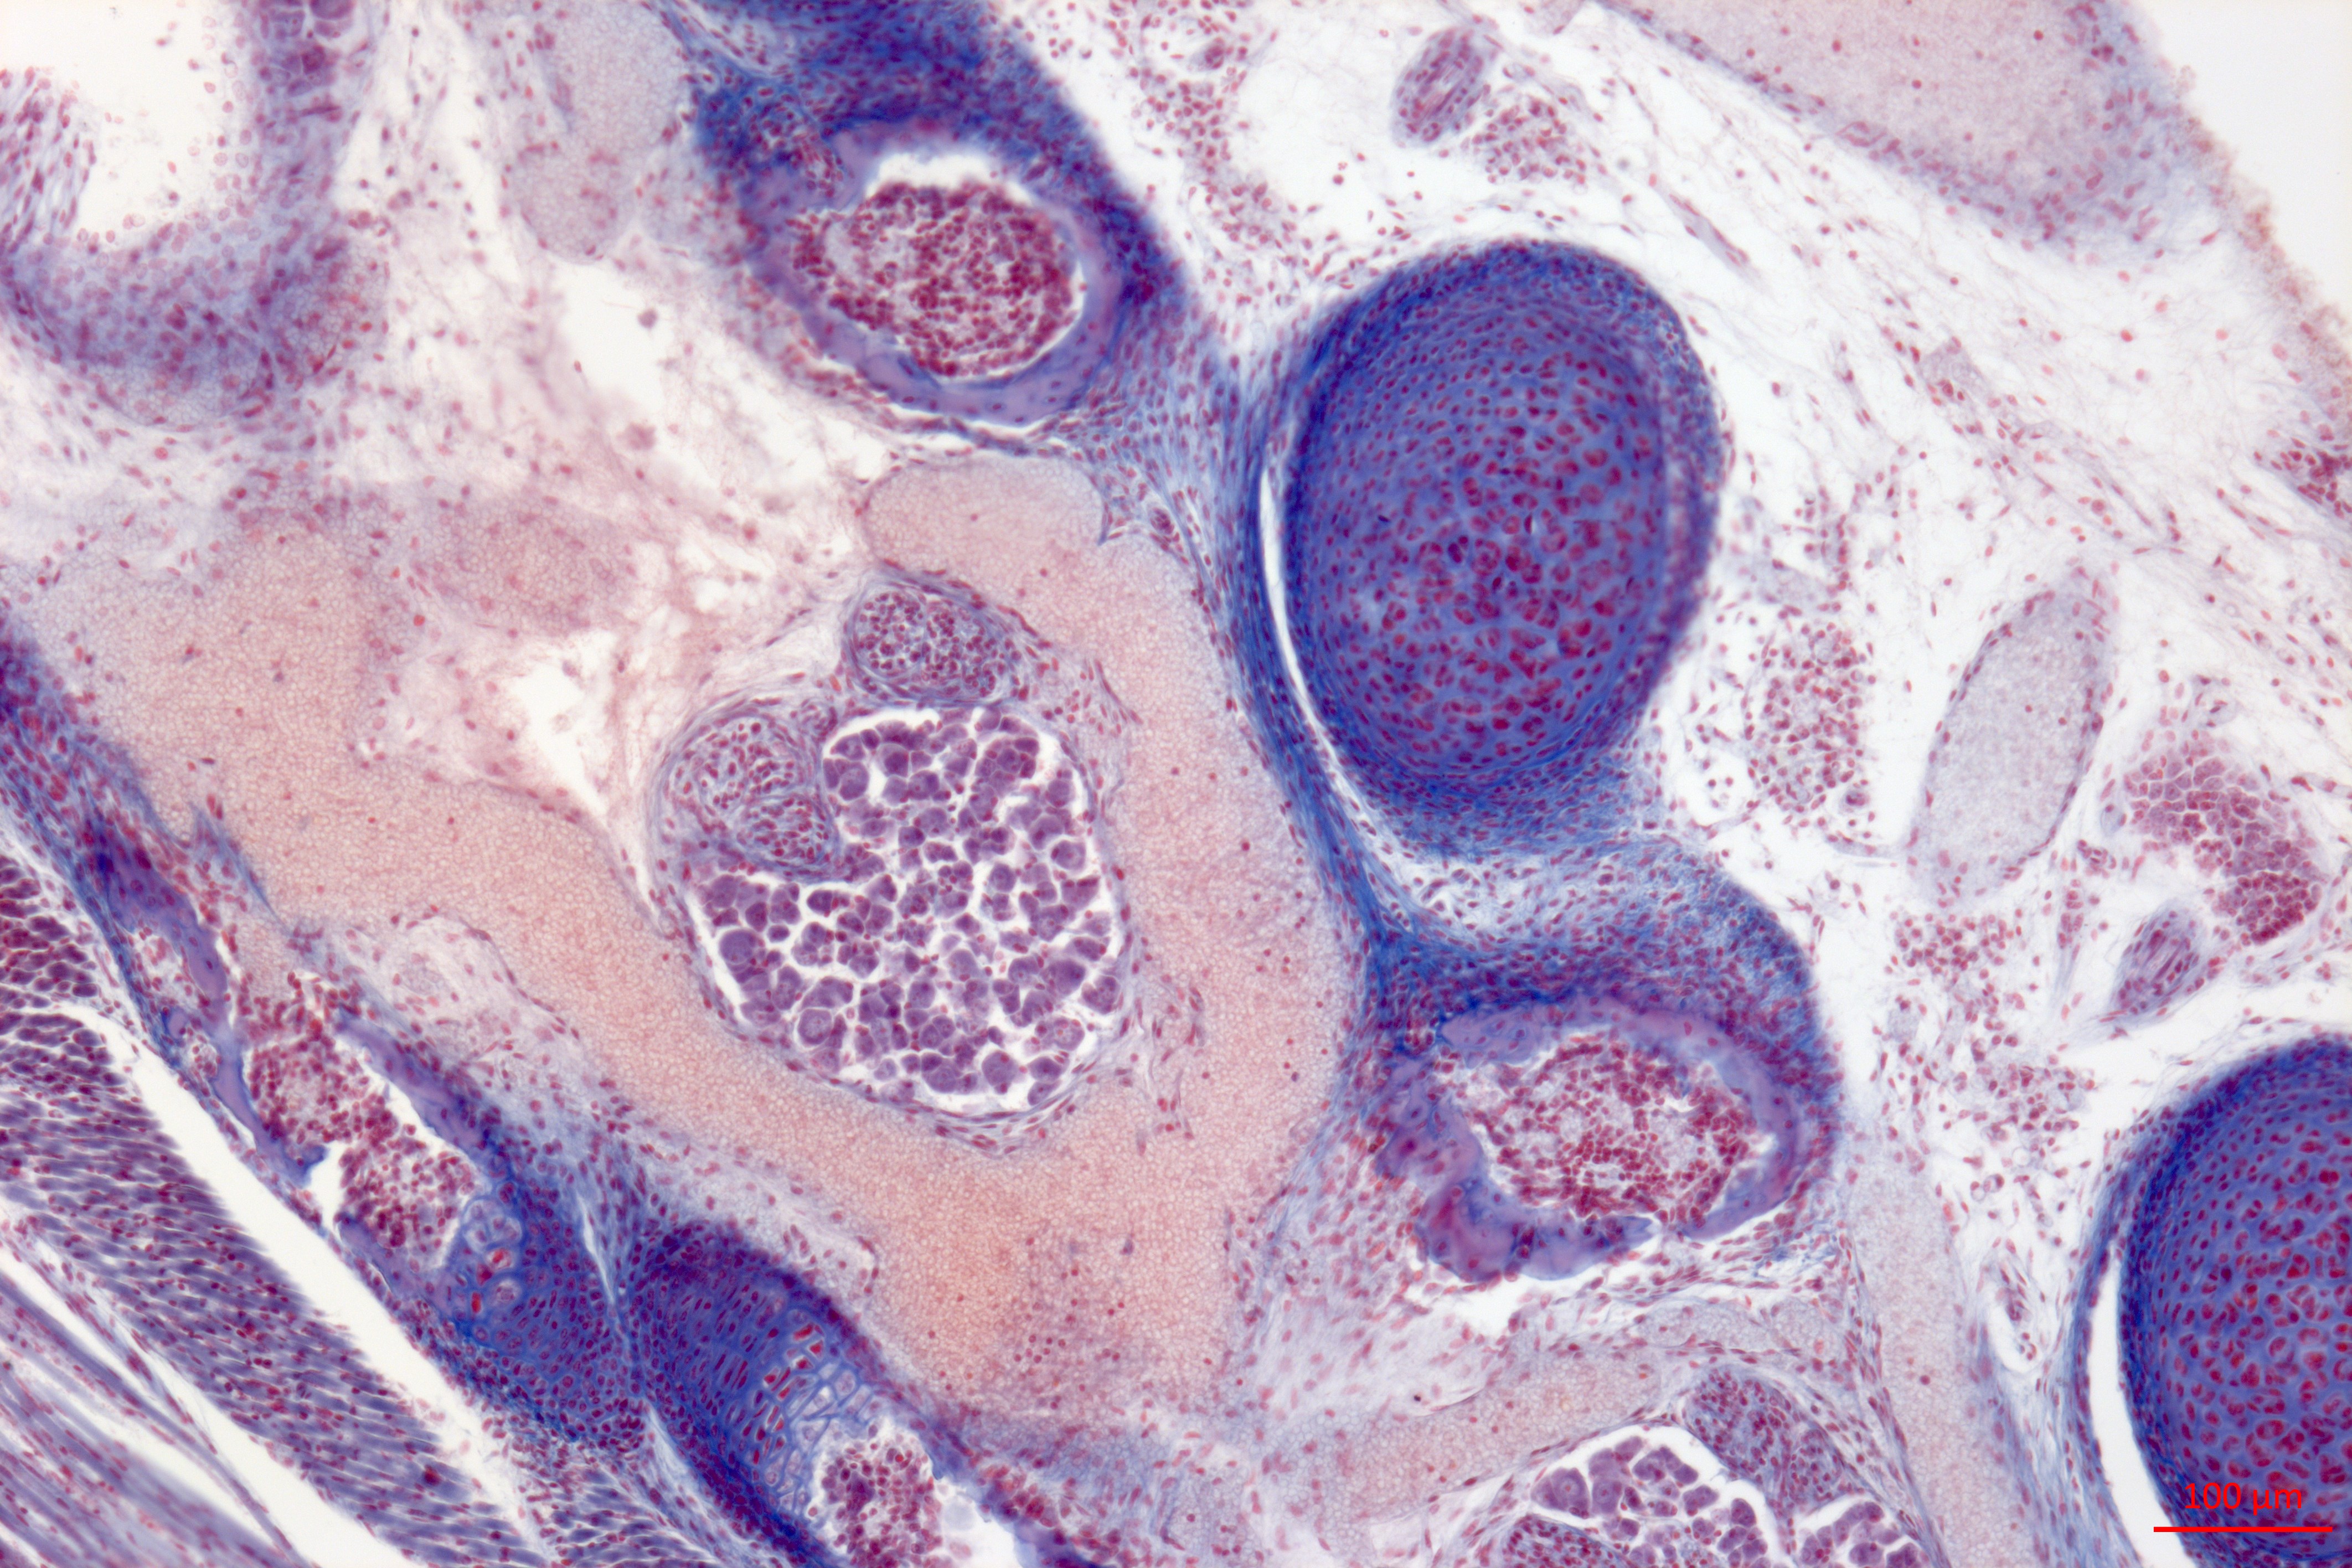 Mouse tissue, stained histology preparation (23180949464)